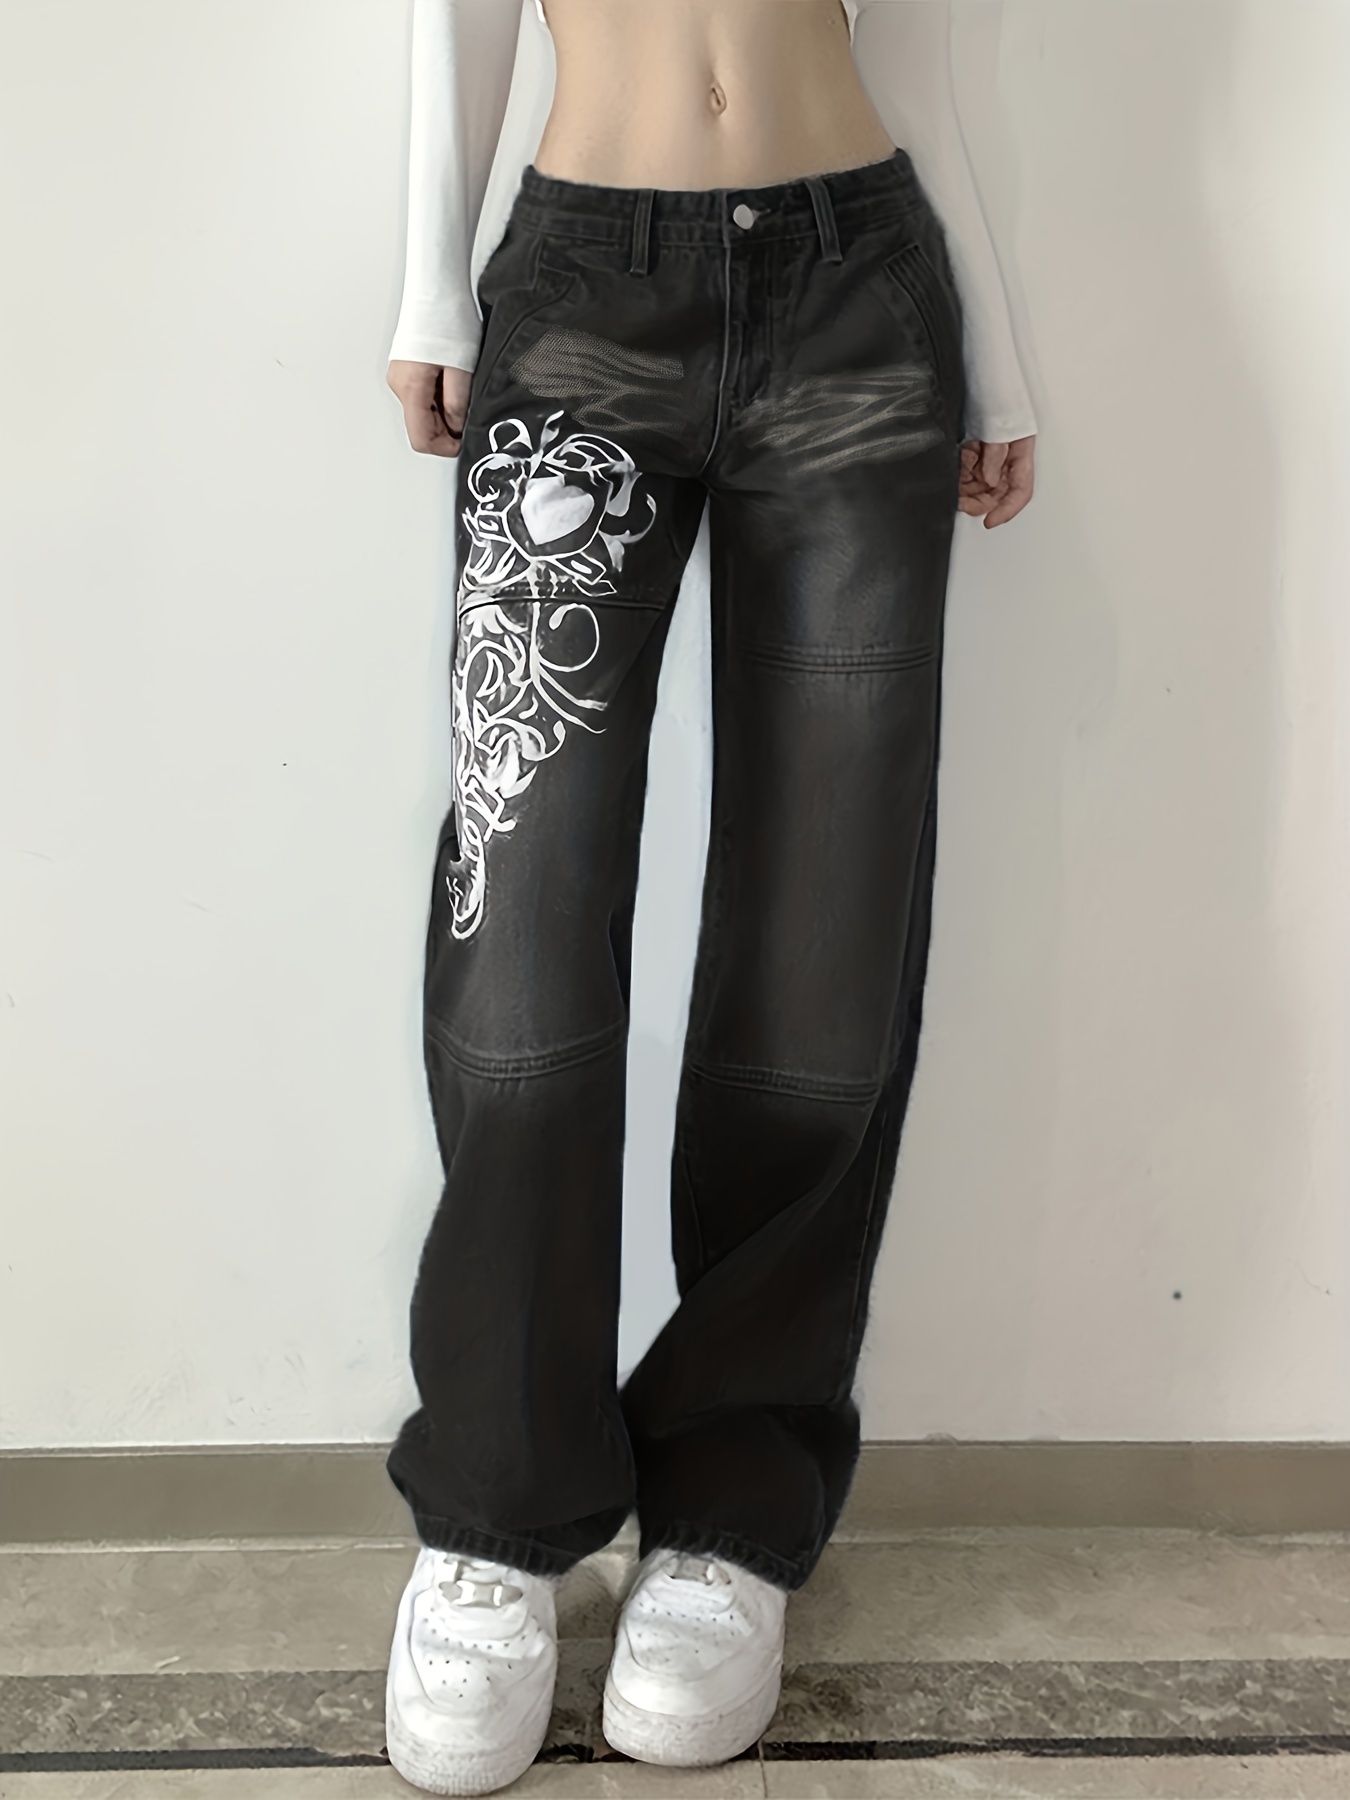 Cute Hearts Graphic Jeans For Young Girls, Pull-on Casual Straight Denim  Pants For All Seasons